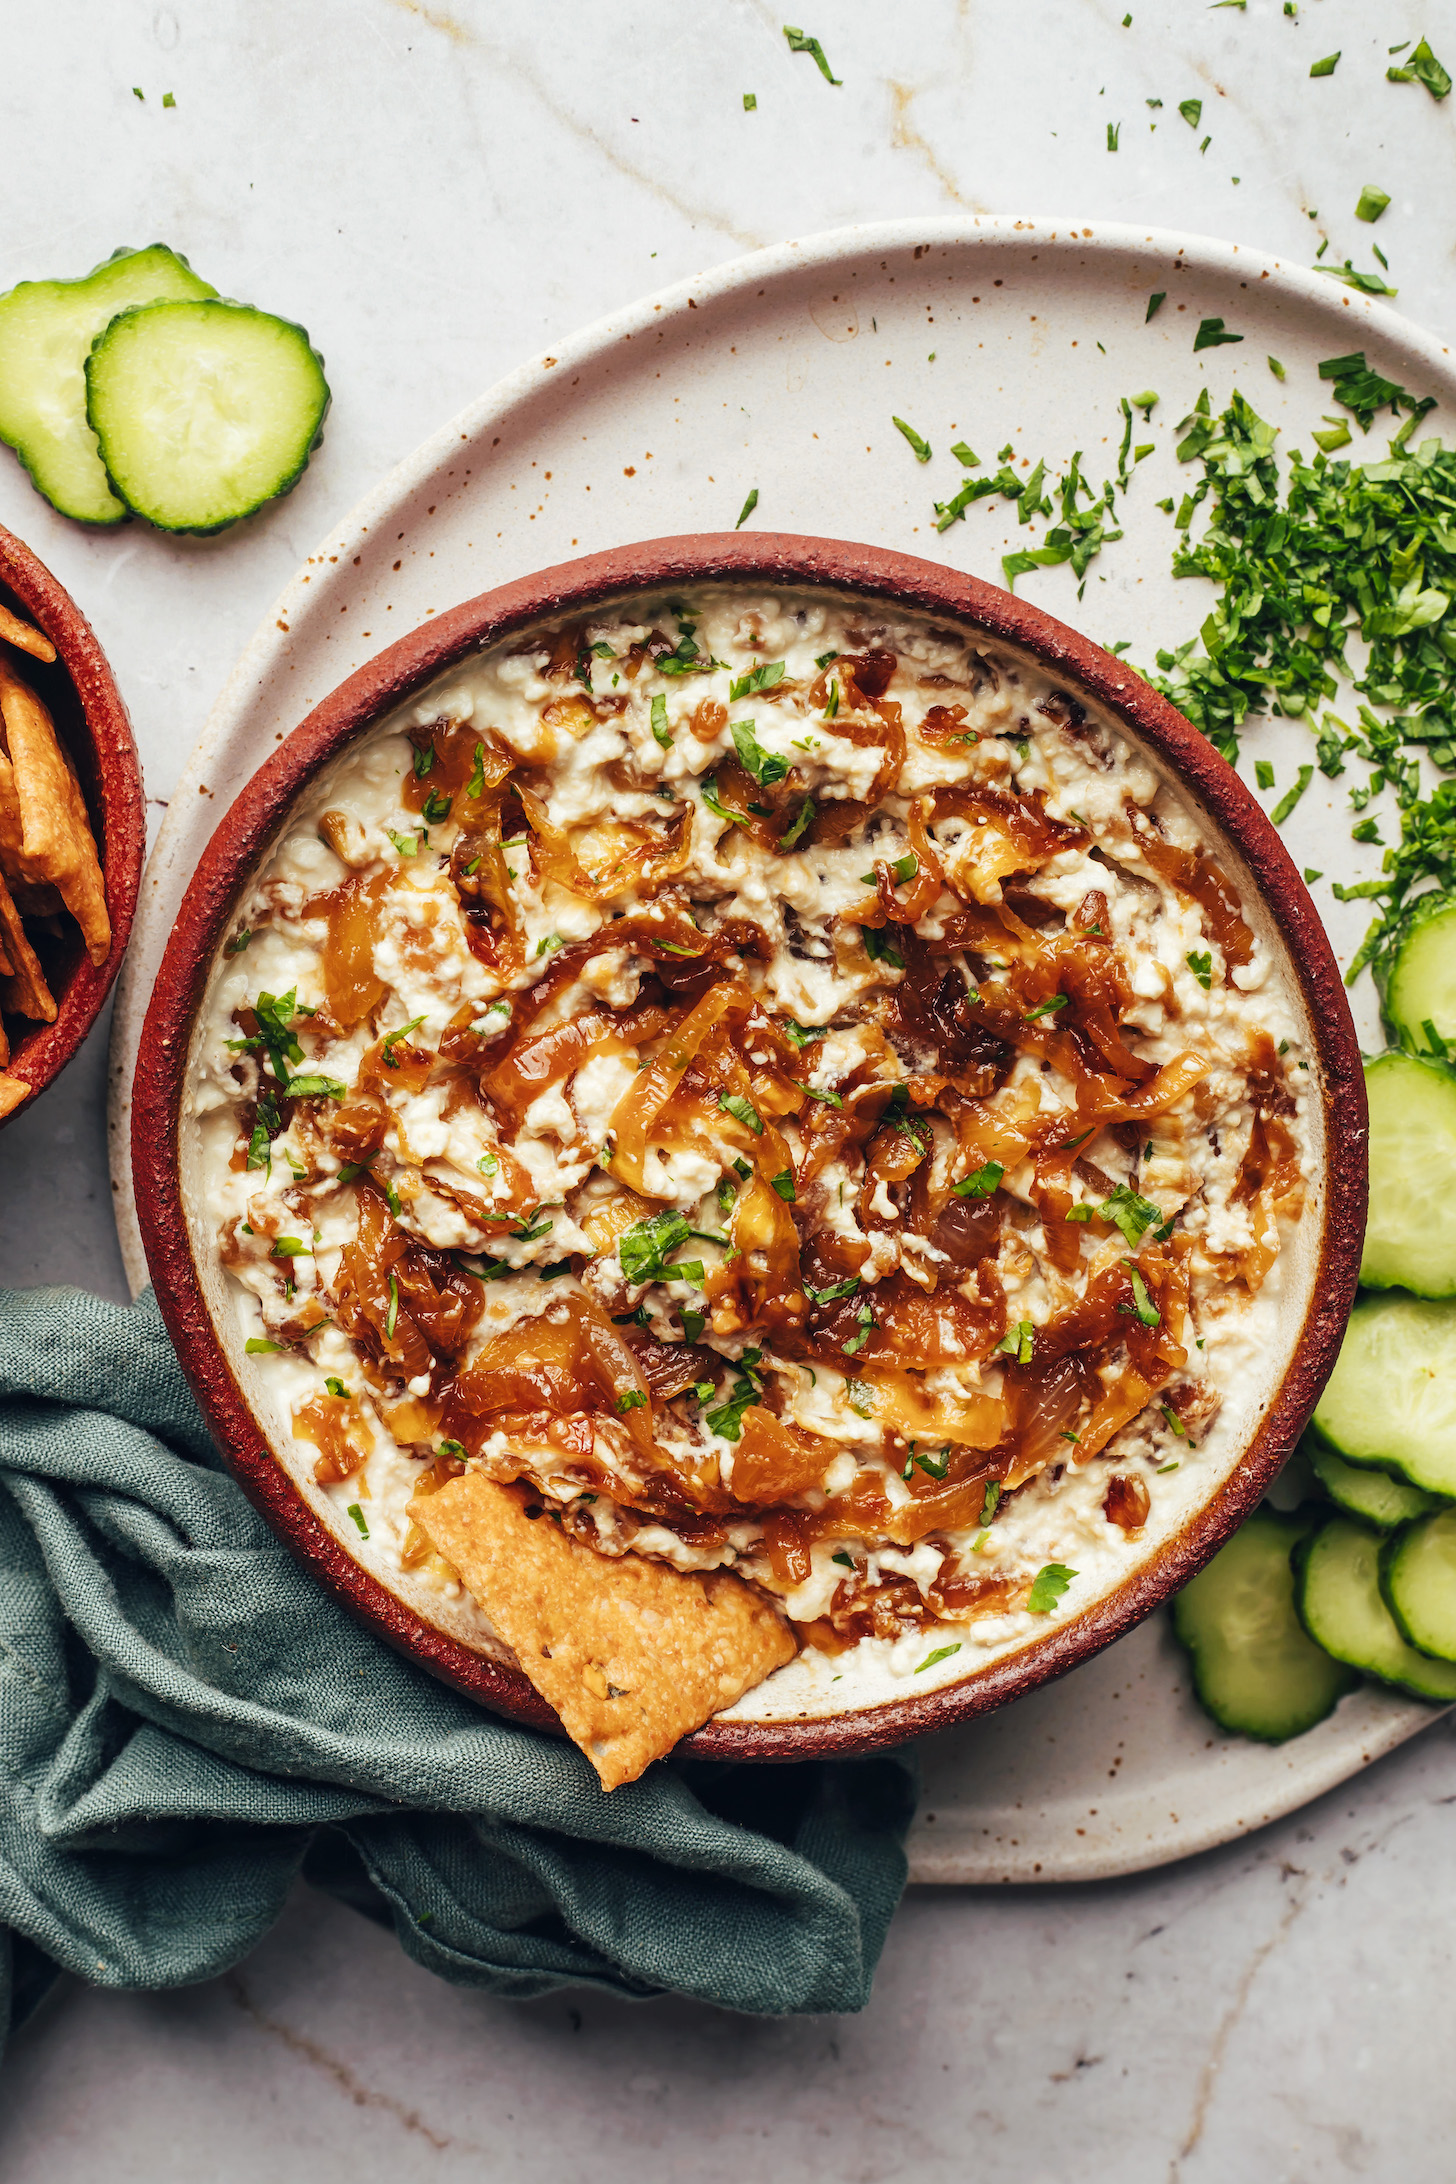 Parsley, sliced cucumbers, and crackers around a bowl of vegan caramelized onion dip